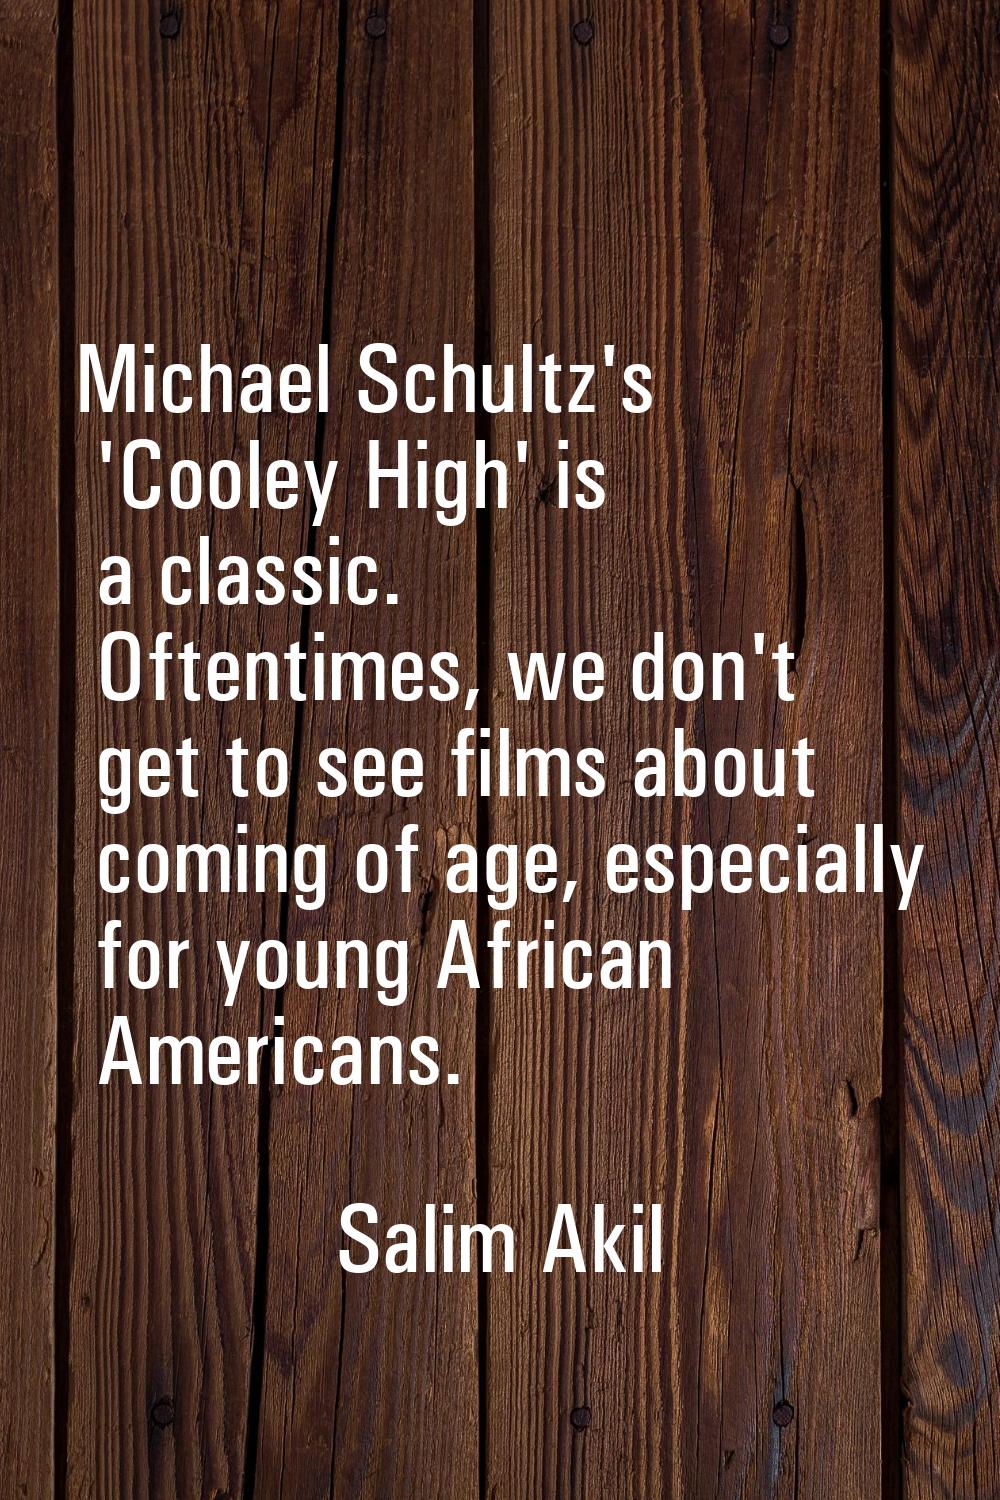 Michael Schultz's 'Cooley High' is a classic. Oftentimes, we don't get to see films about coming of